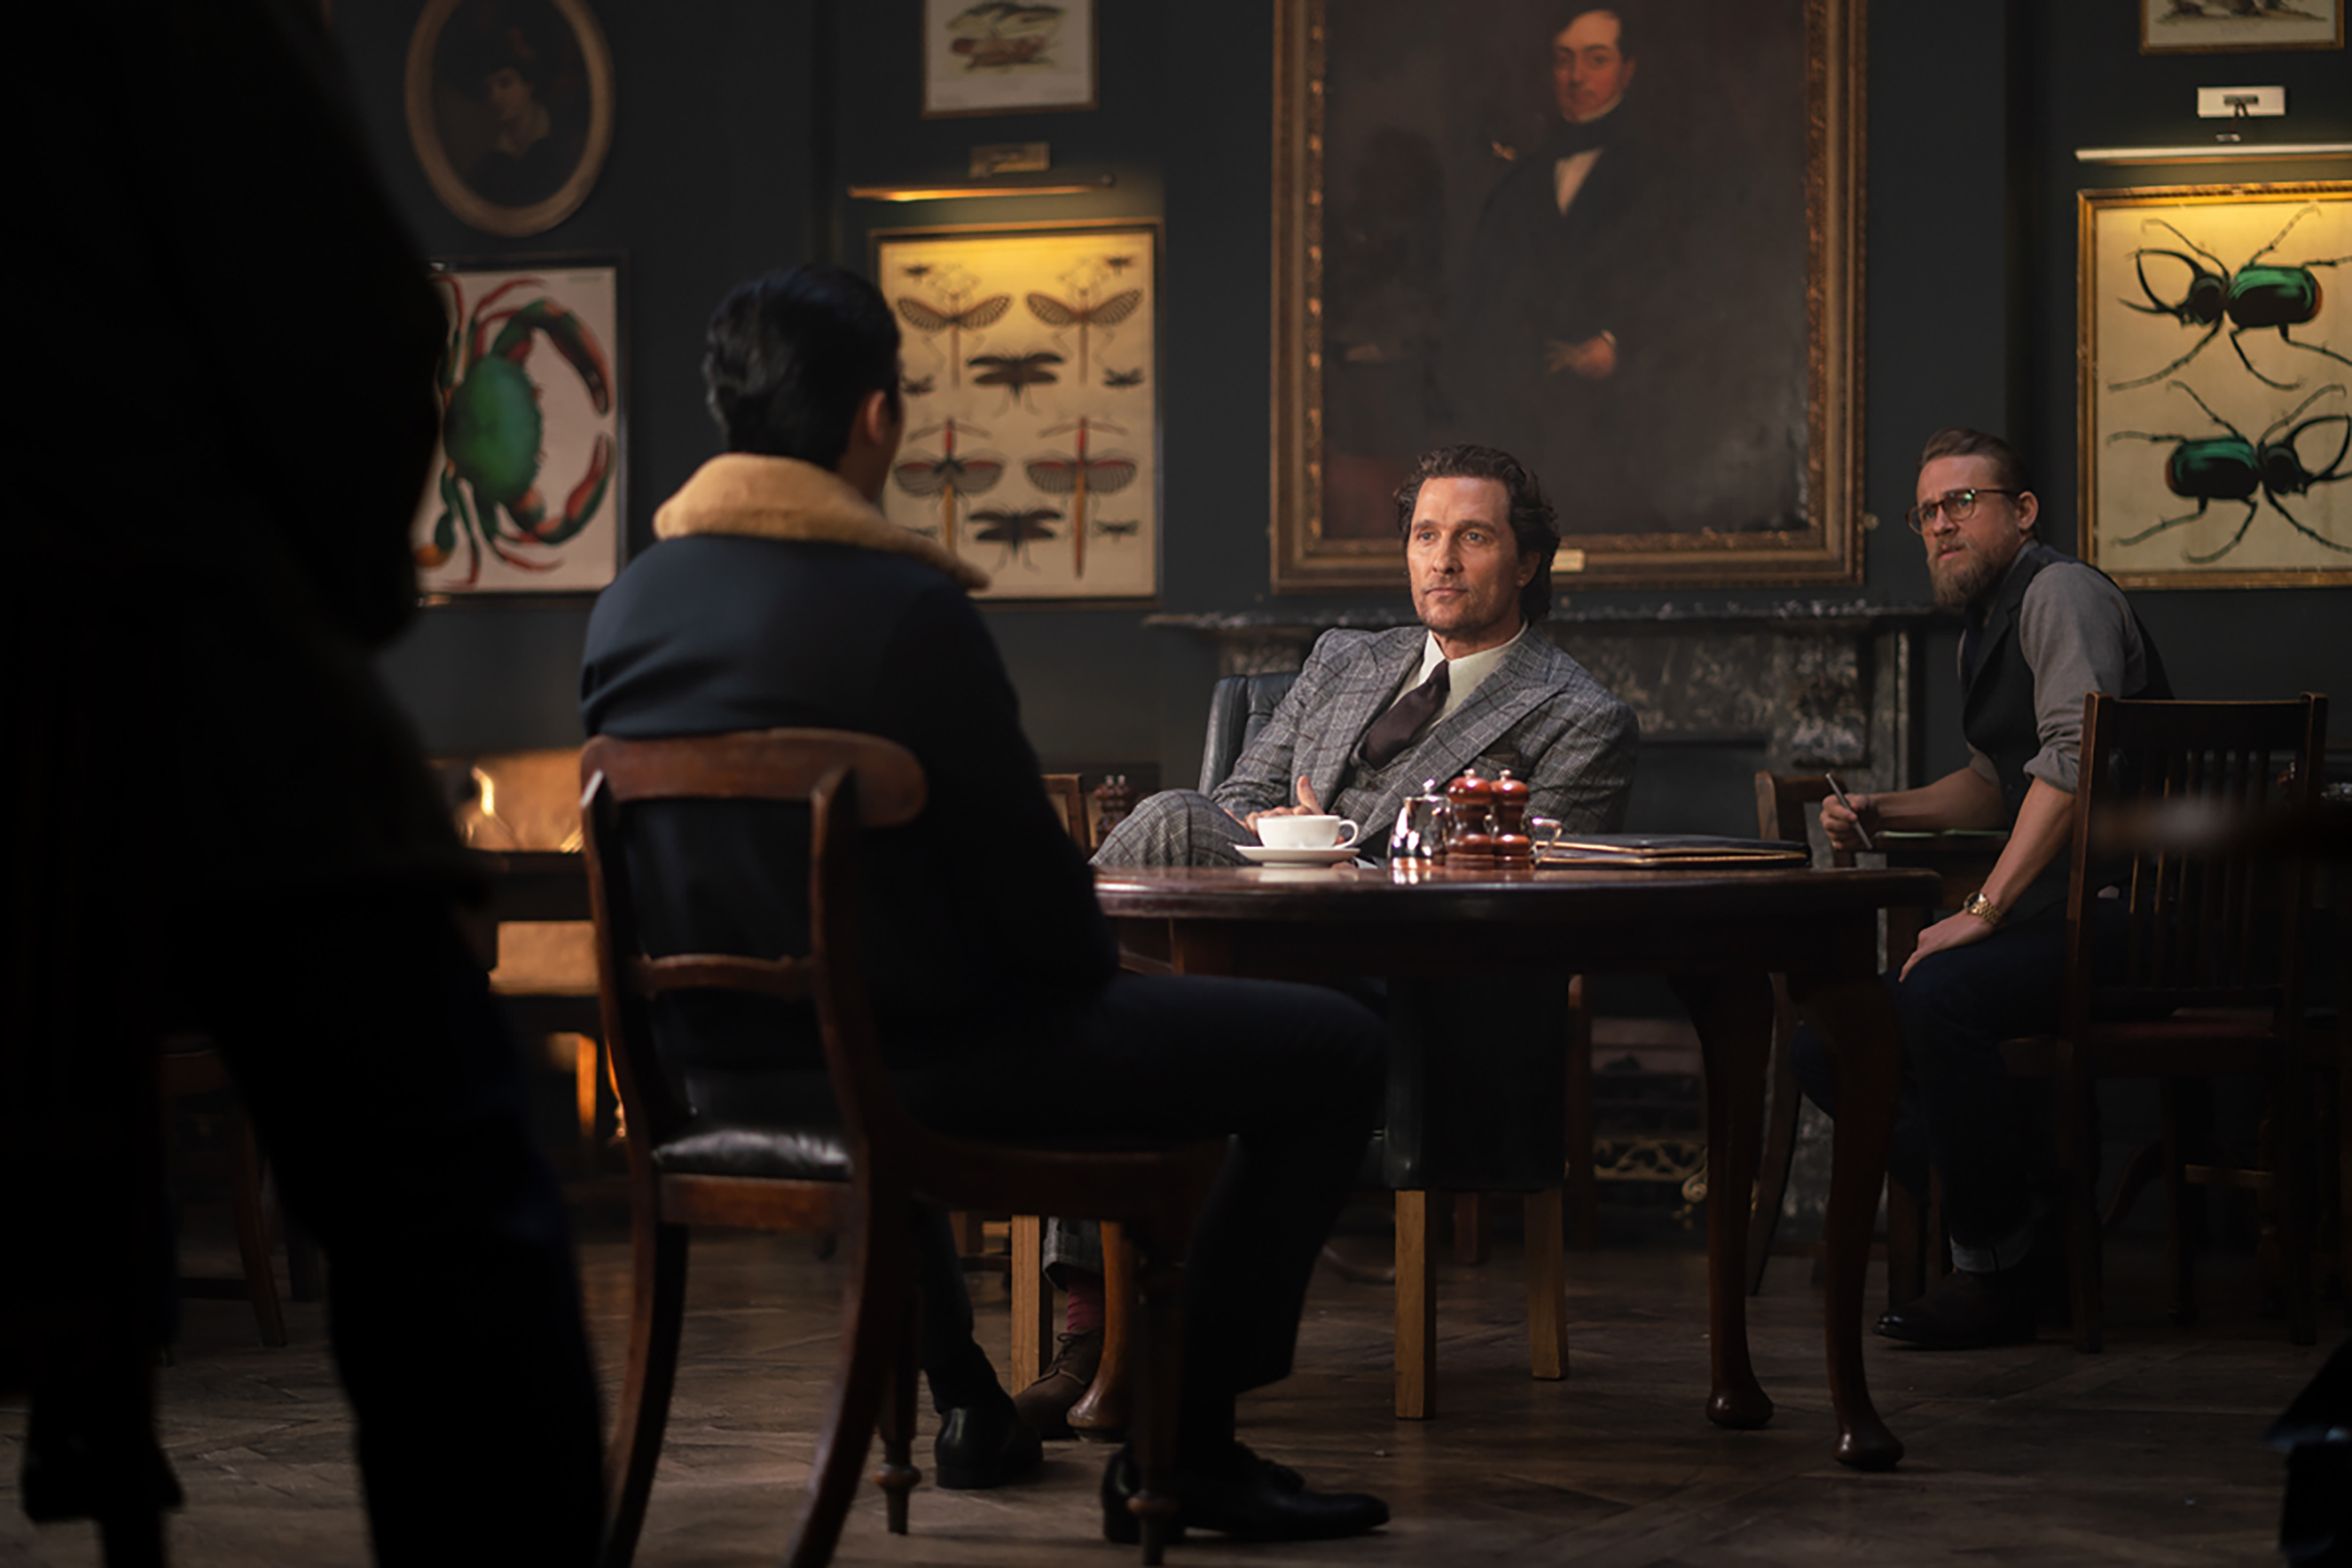 Henry Golding, Matthew McConaughey and Charlie Hunnam try to make a gentleman’s agreement in 'The Gentlemen' (Christopher Raphael)